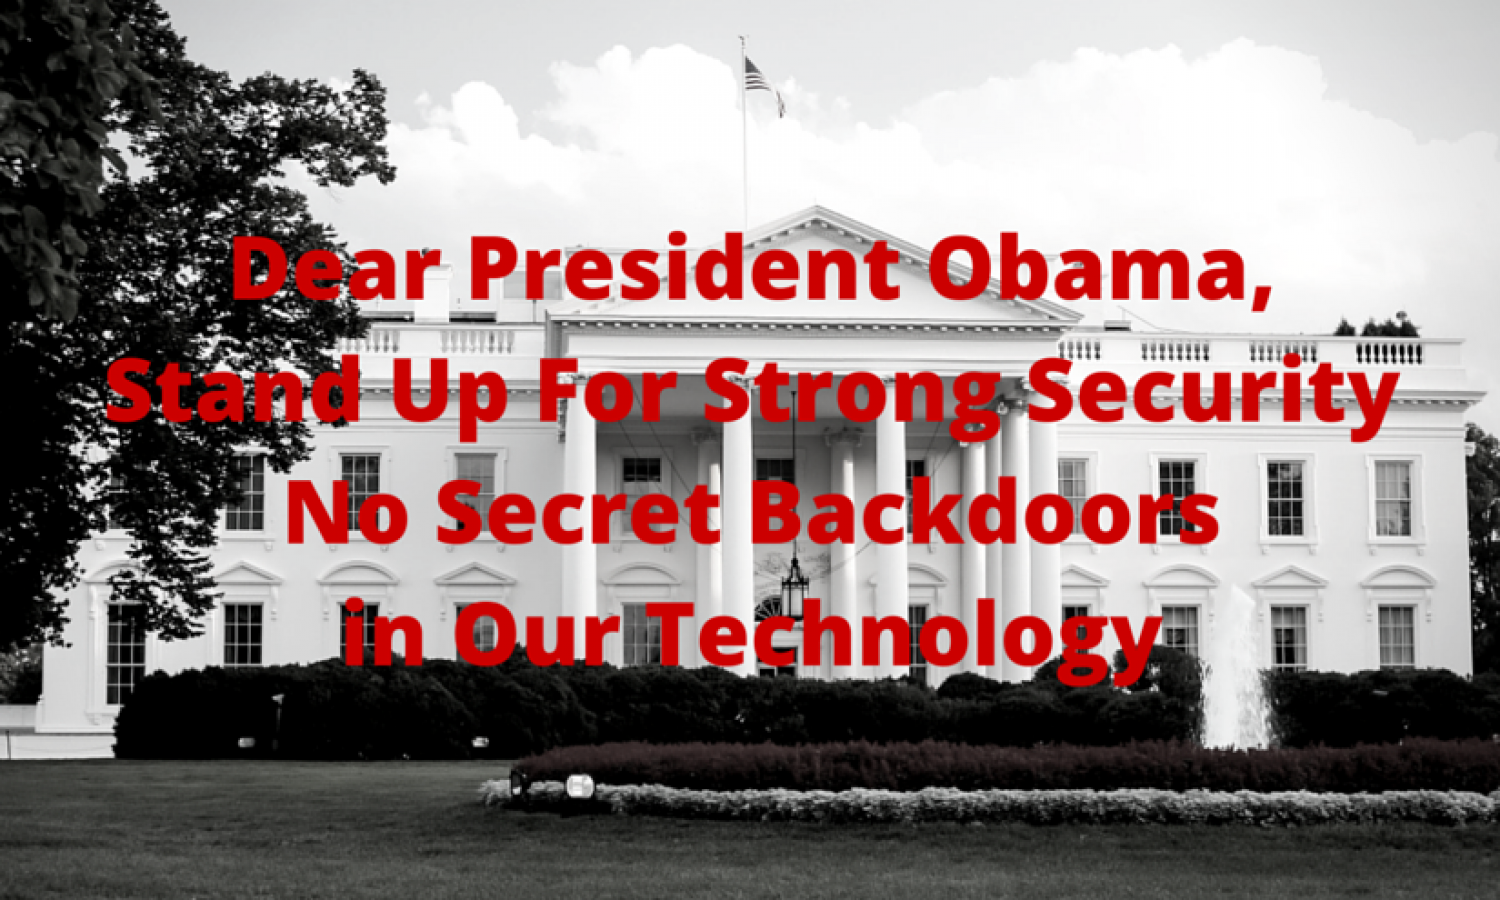 Dear President Obama, Stand Up For Strong Security No Secret Backdoors in Our Technology